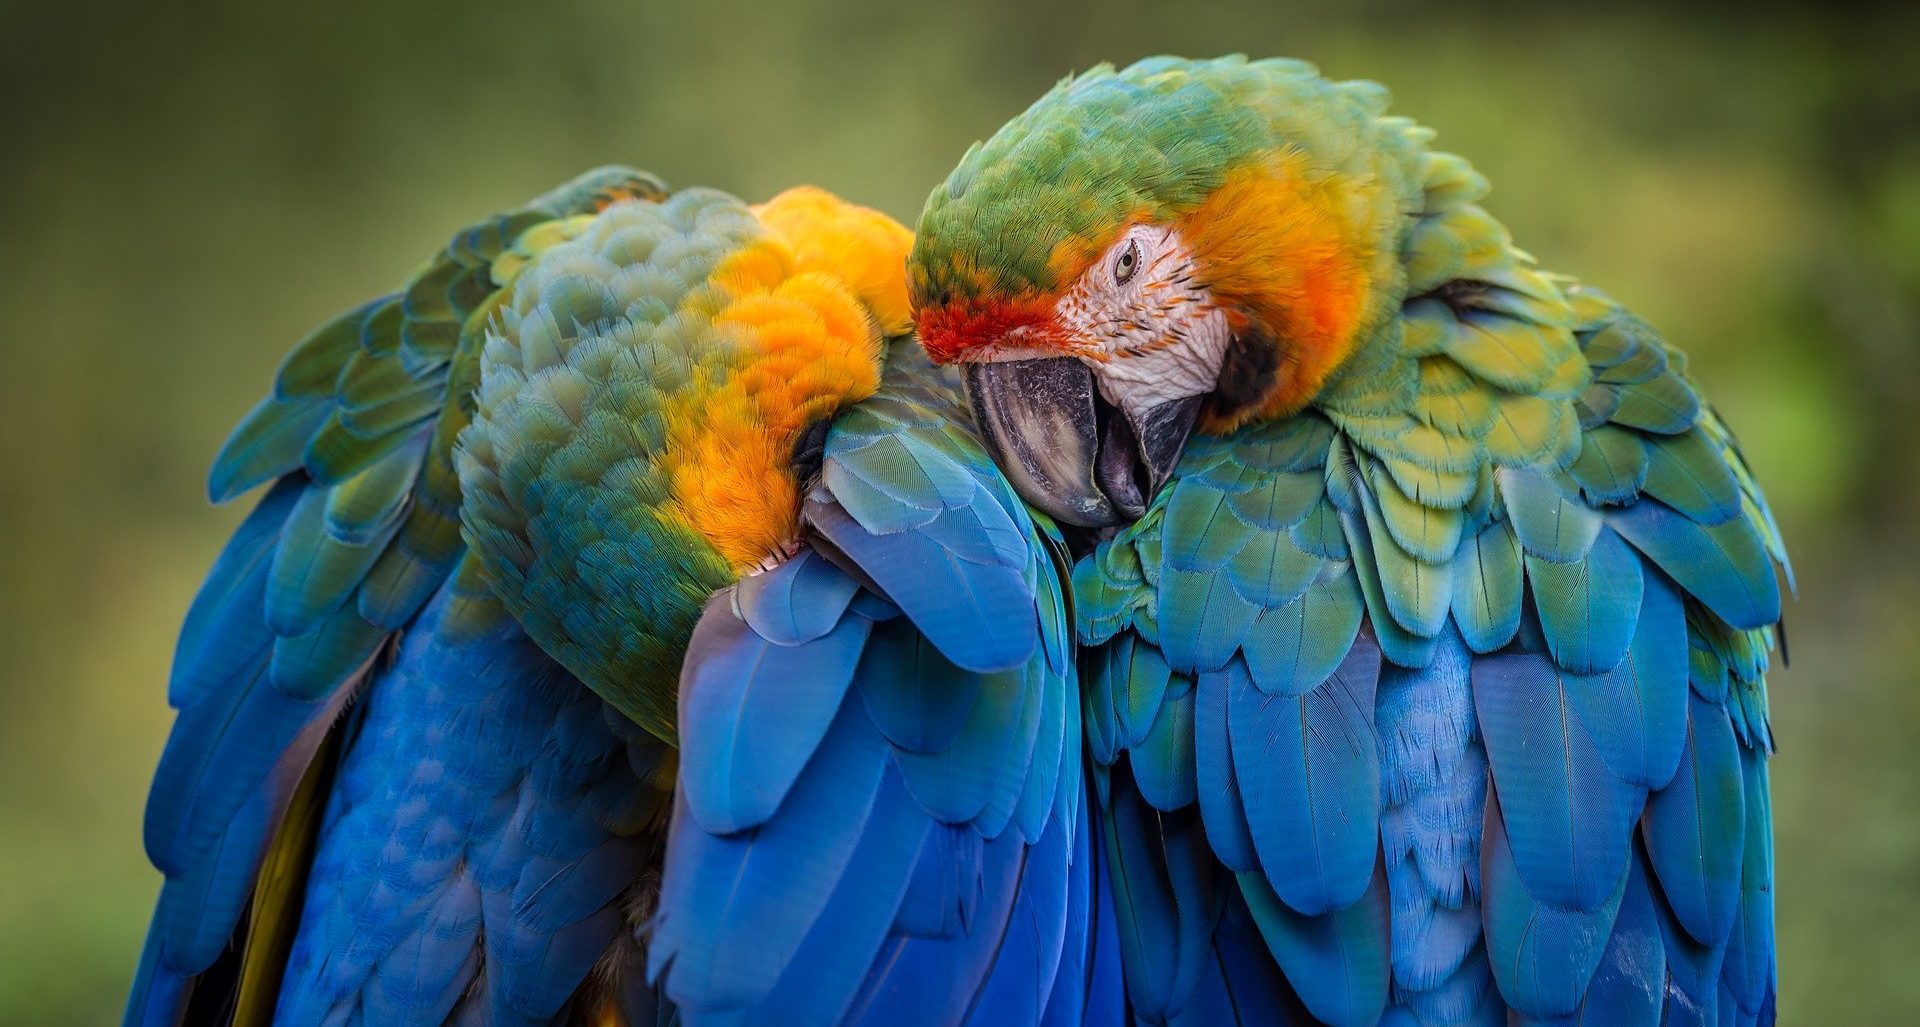 Free picture for PowerPoint presentation of parrots from pixabay.com.